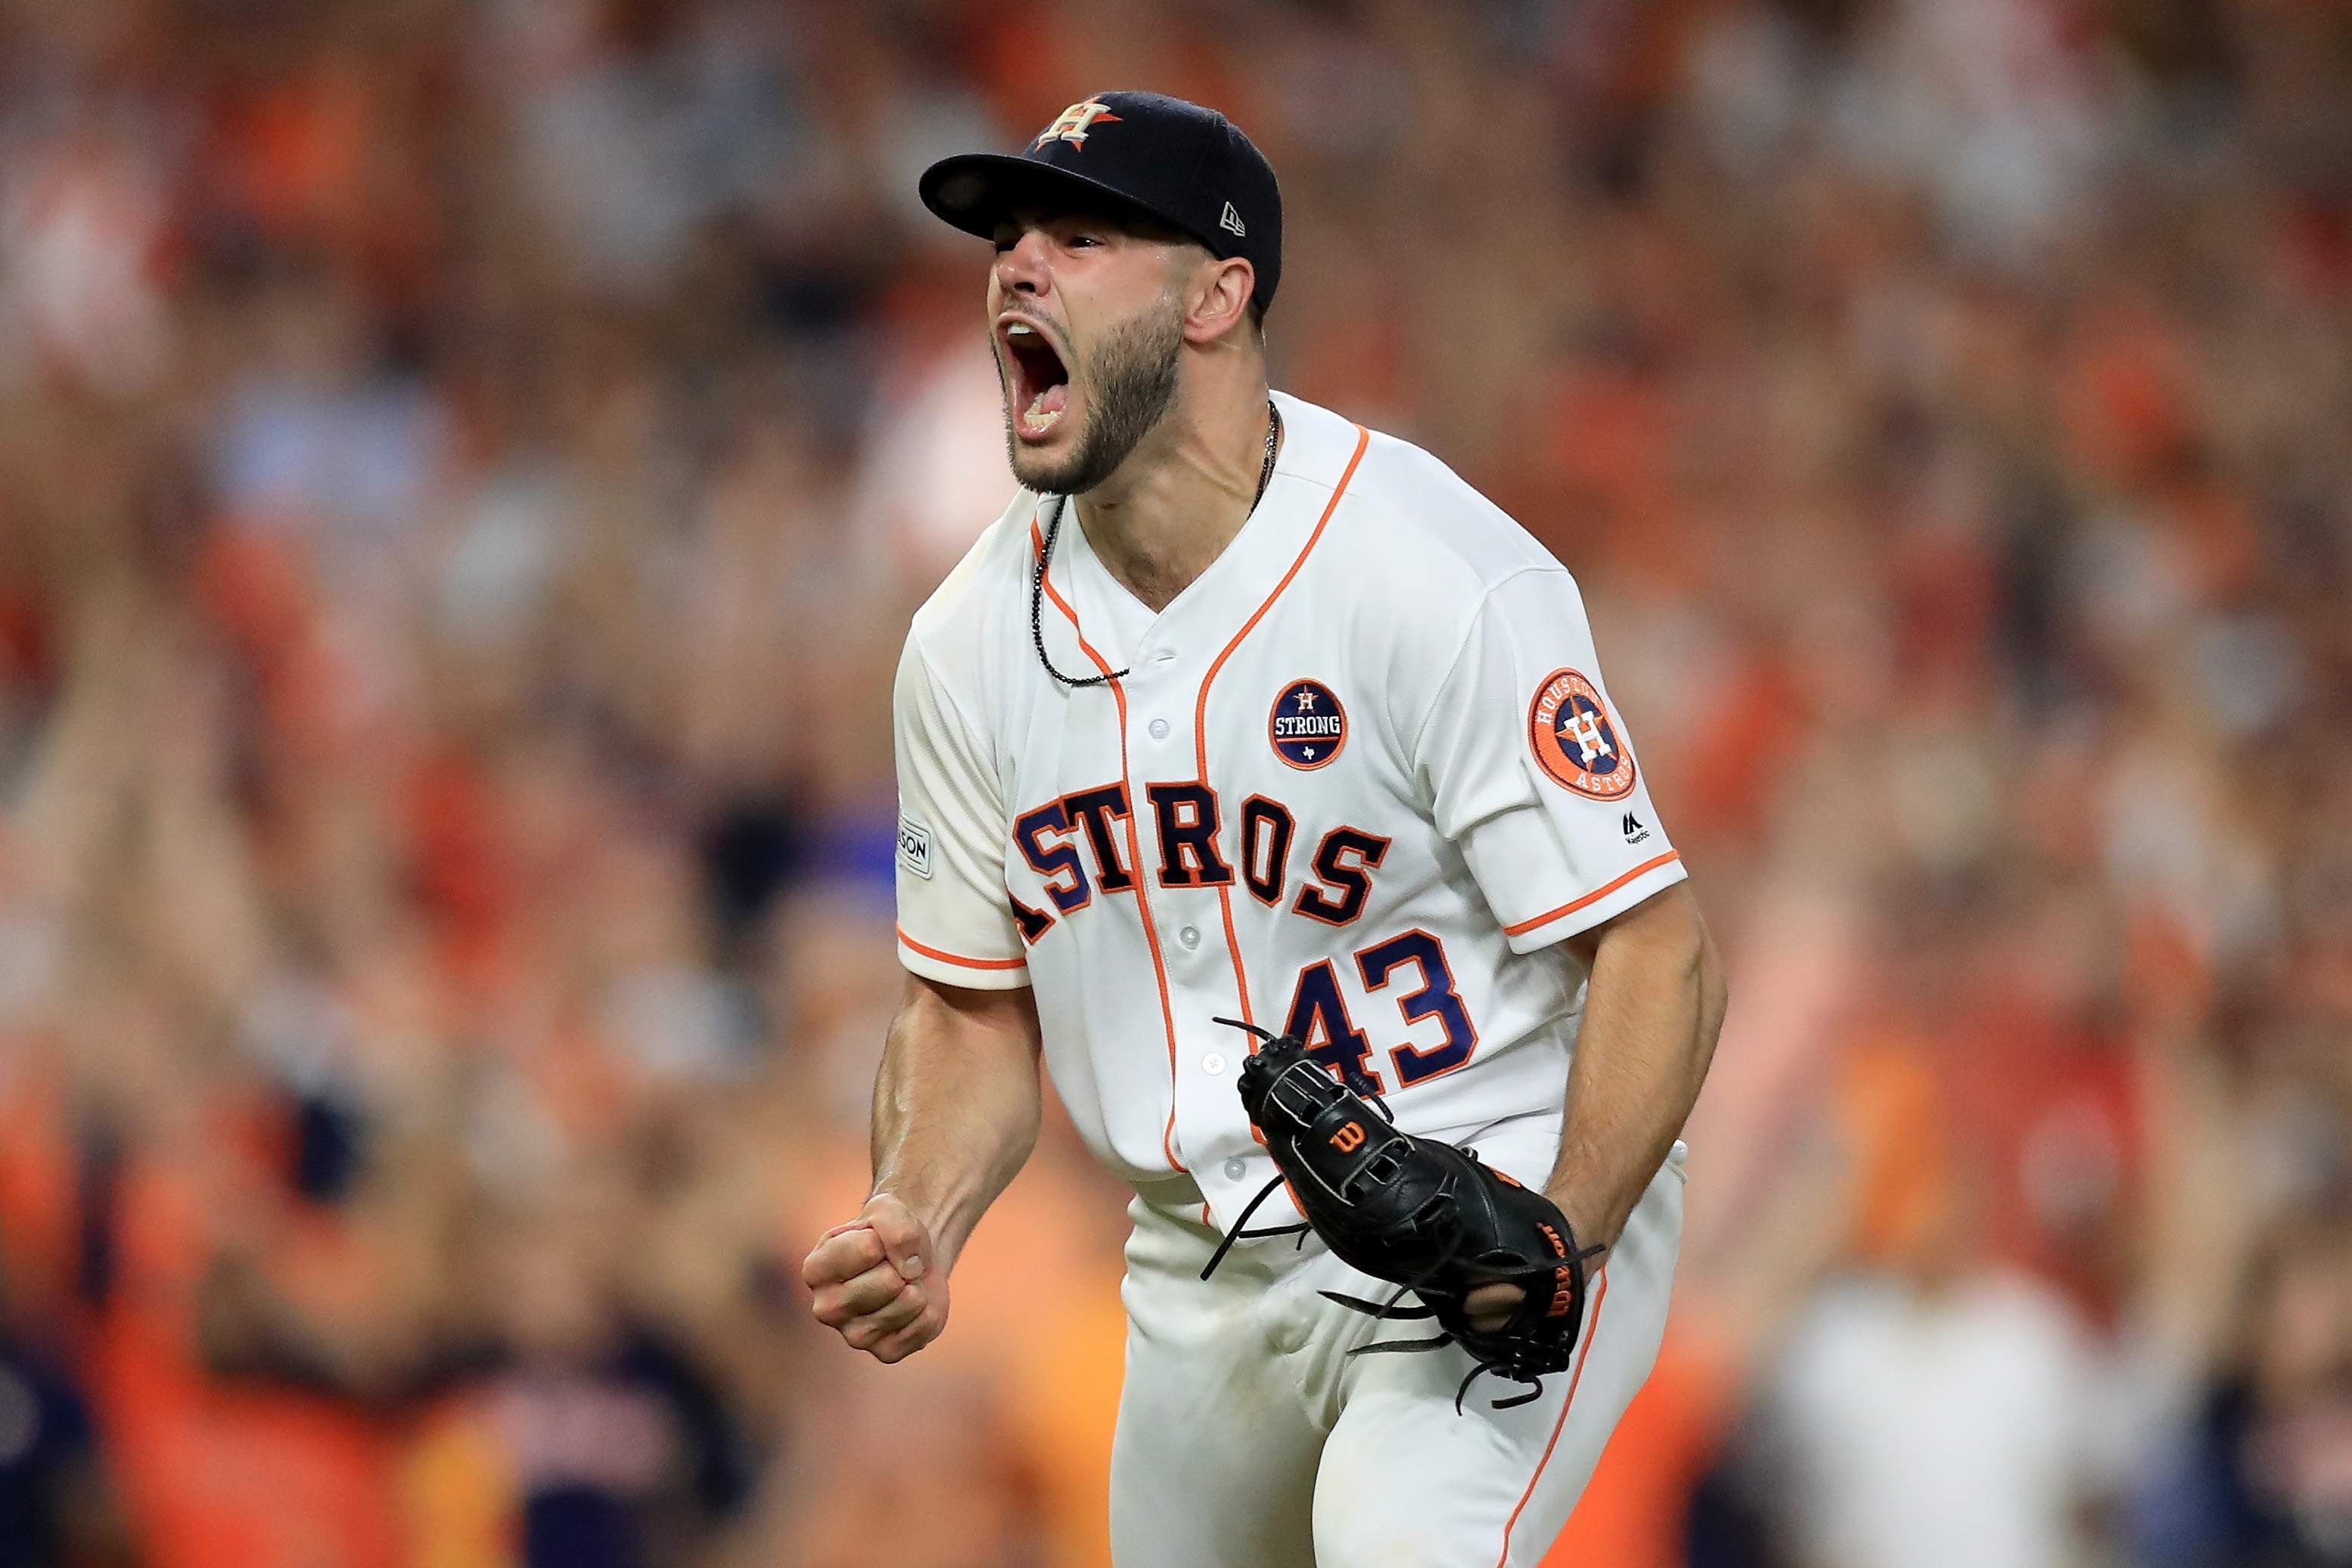 Astros beat Yankees in ALCS Game 7, will face Dodgers in World Series